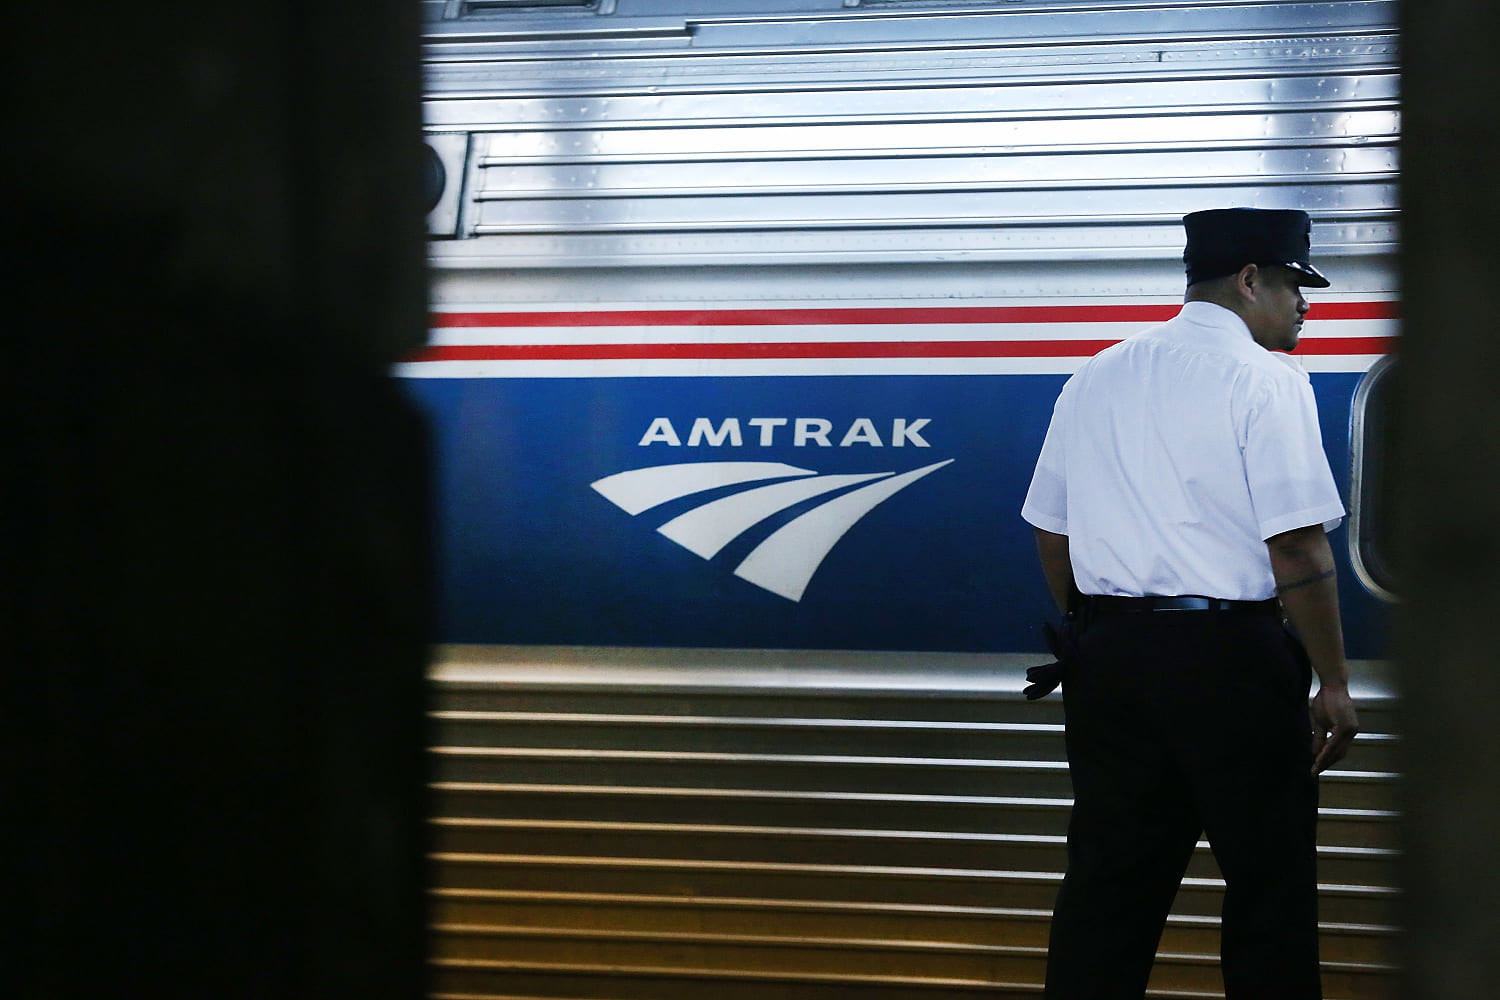 Child is among 3 dead after Amtrak train hits a pickup truck in upstate New York